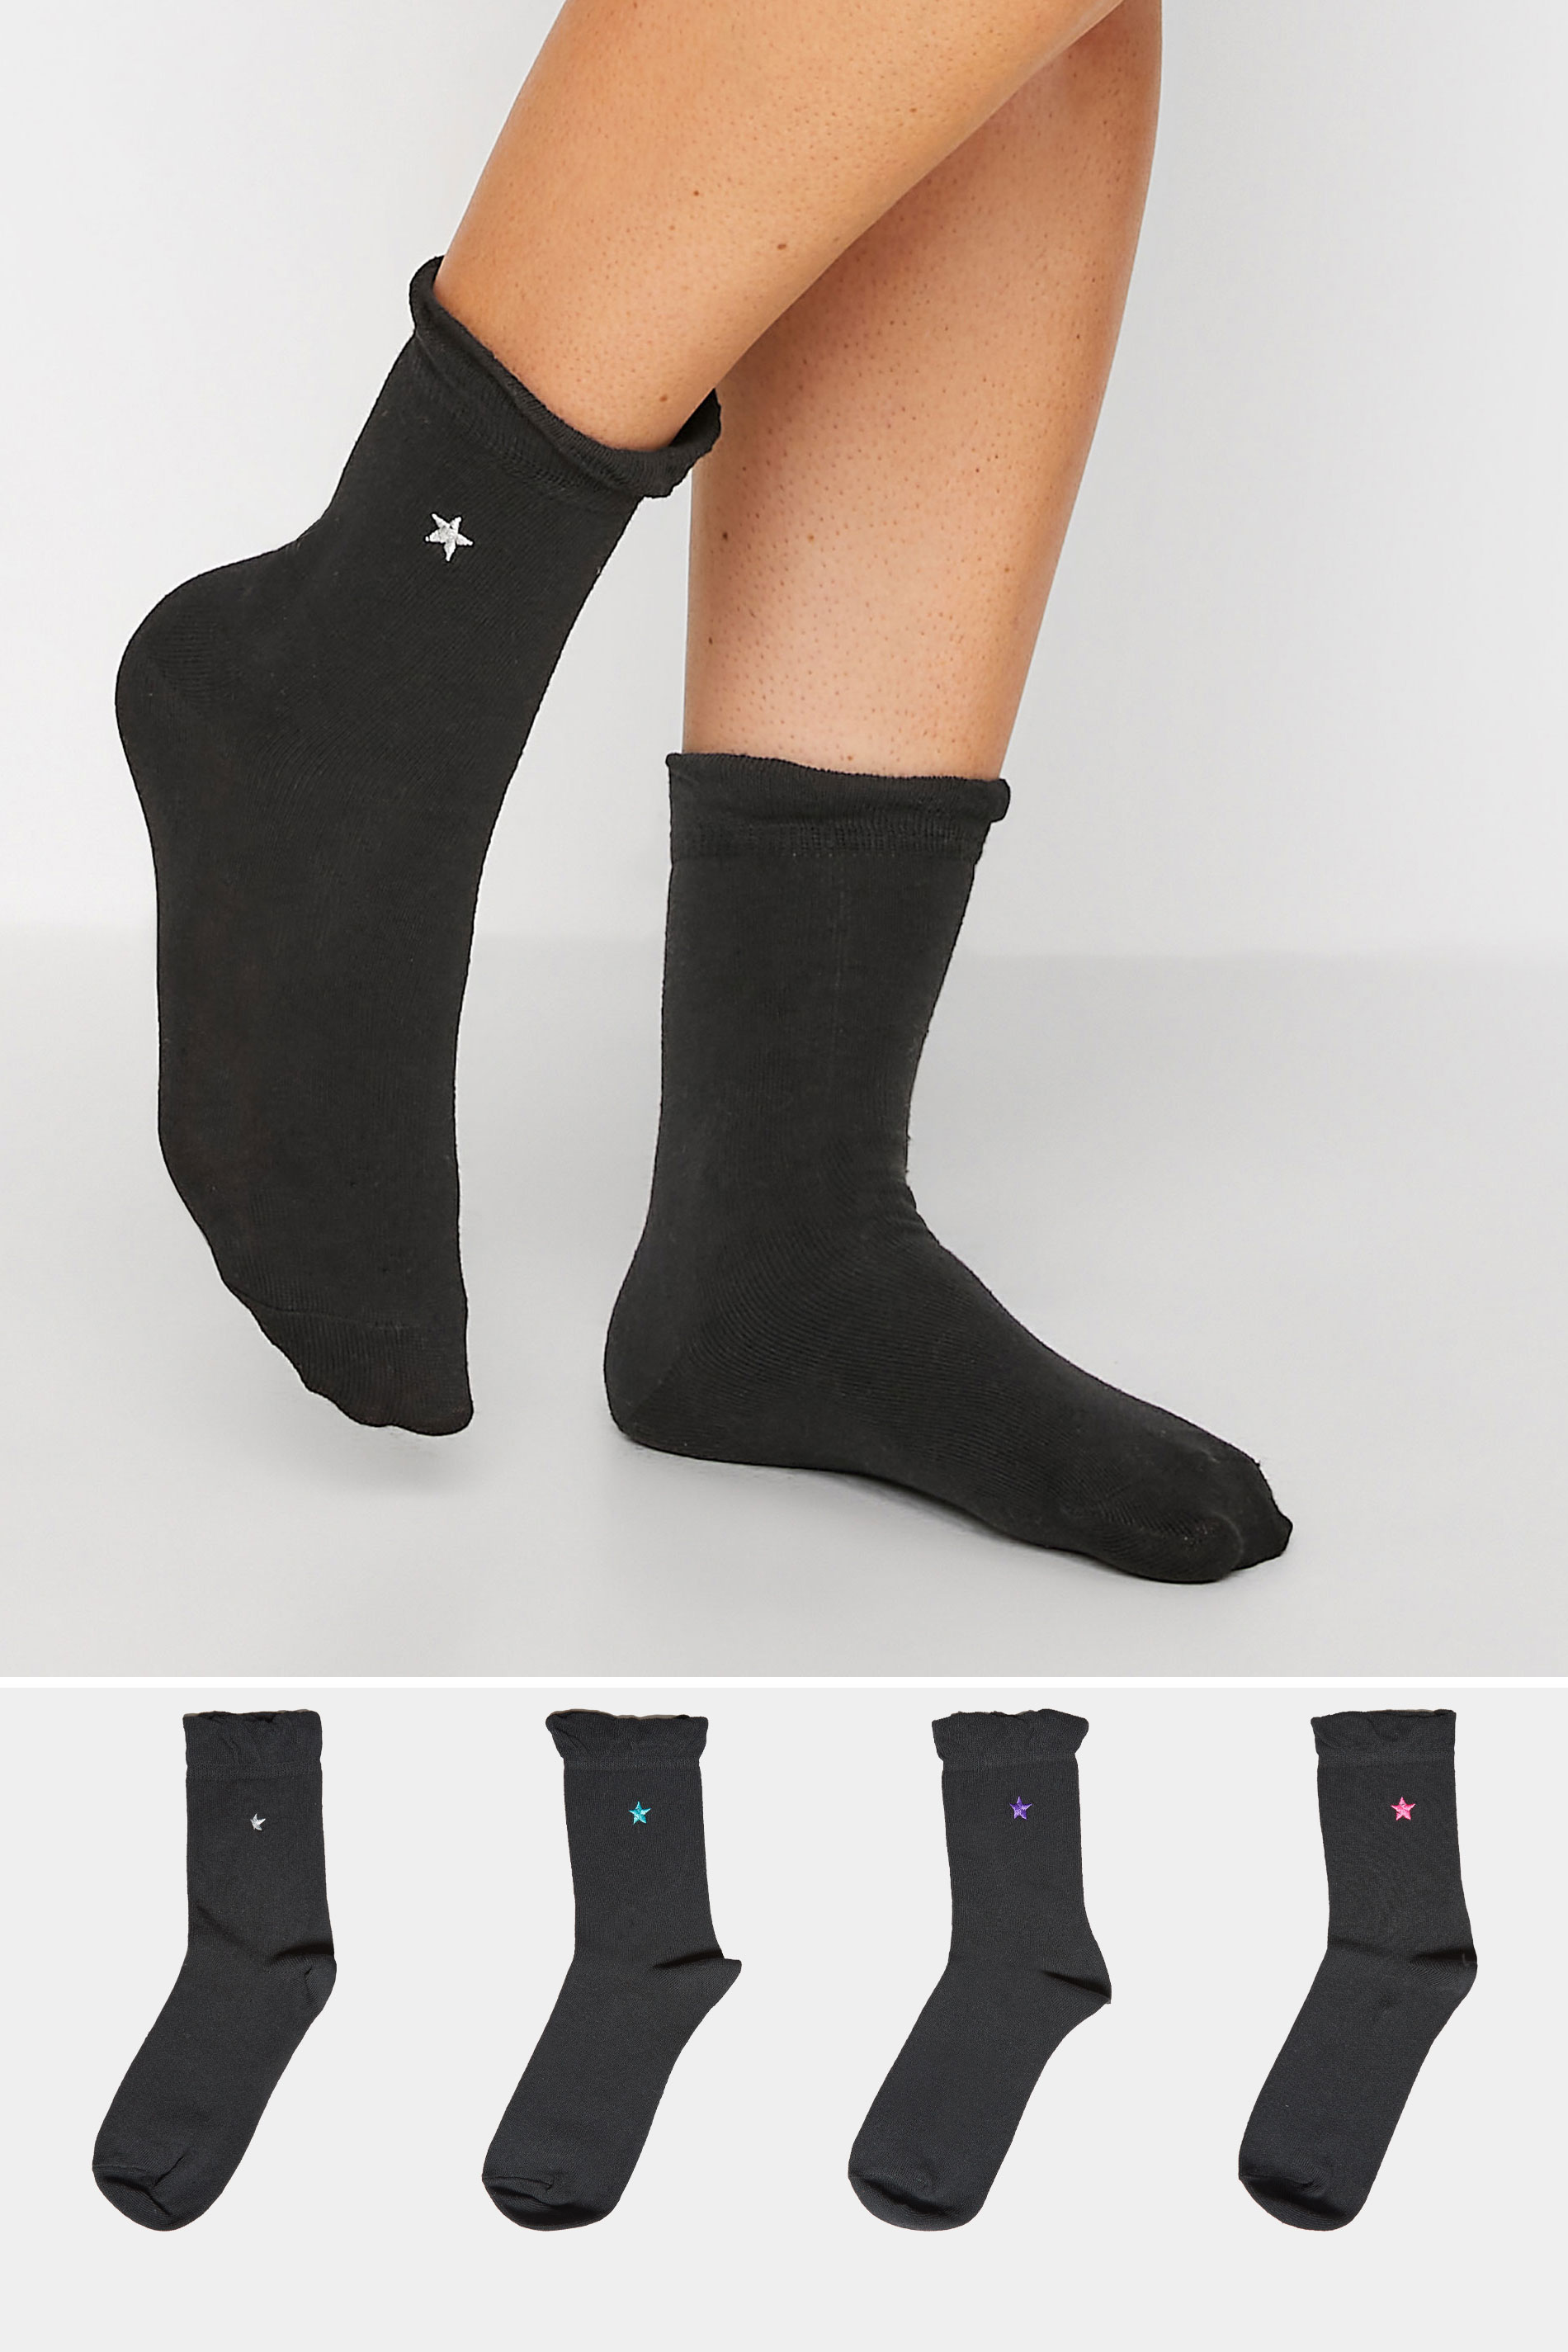 4 PACK Black Embroidered Star Ankle Socks | Yours Clothing 1